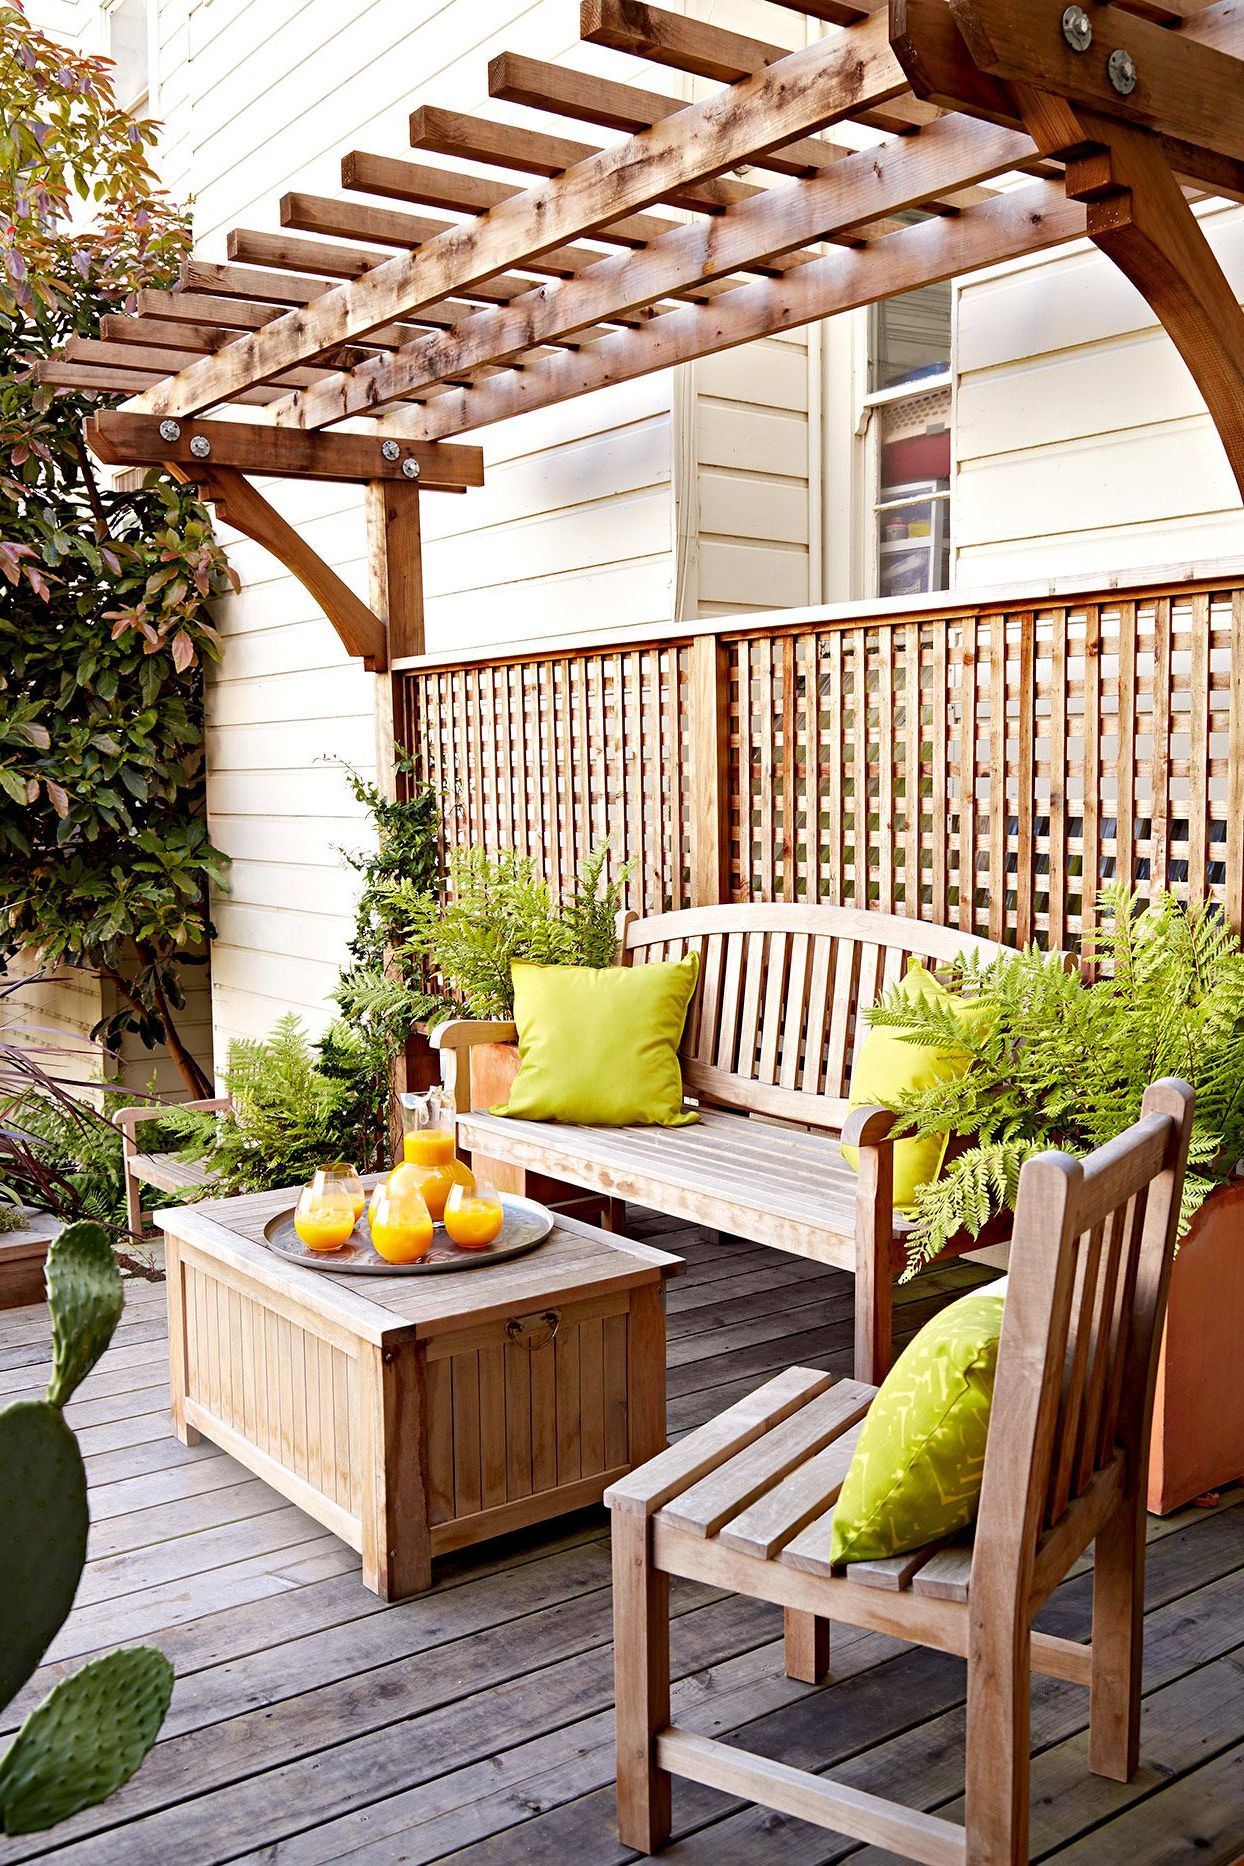 Balcony And Deck With Soft Cushions In 2018 20 Small Deck Ideas To Maximize Your Outdoor Living Space (View 14 of 15)